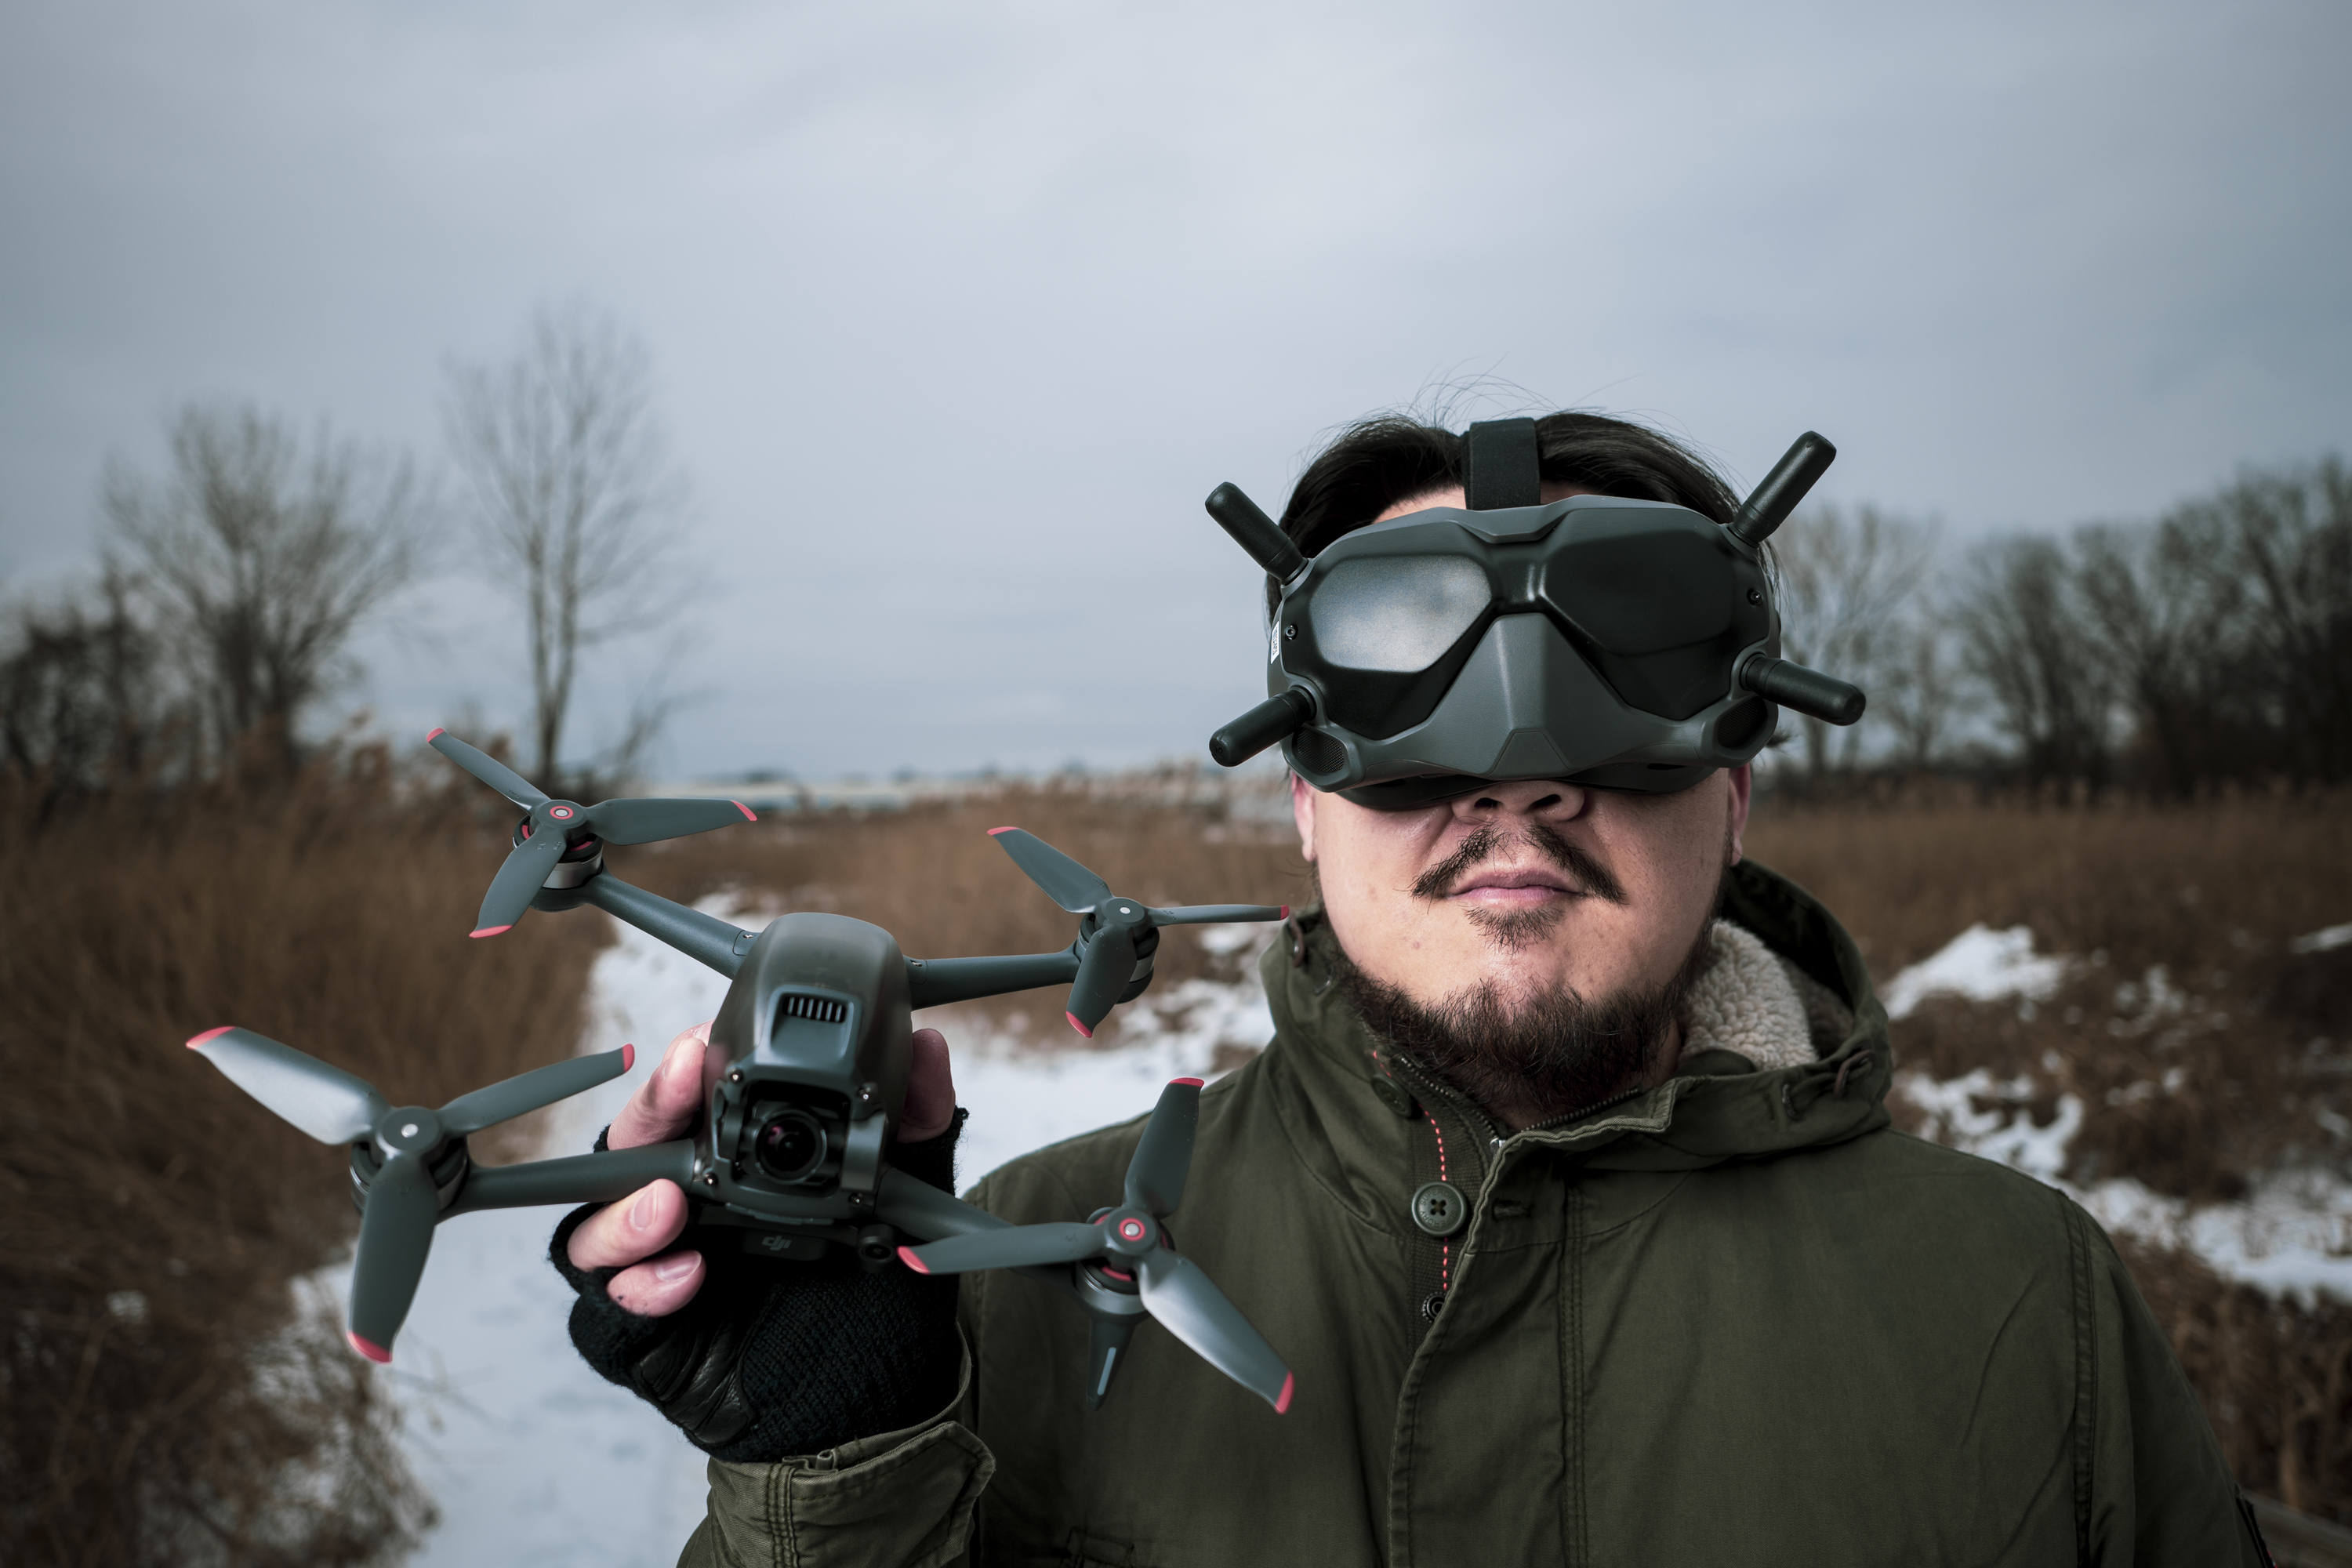 The DJI FPV Makes Photography into a First Person Shooter